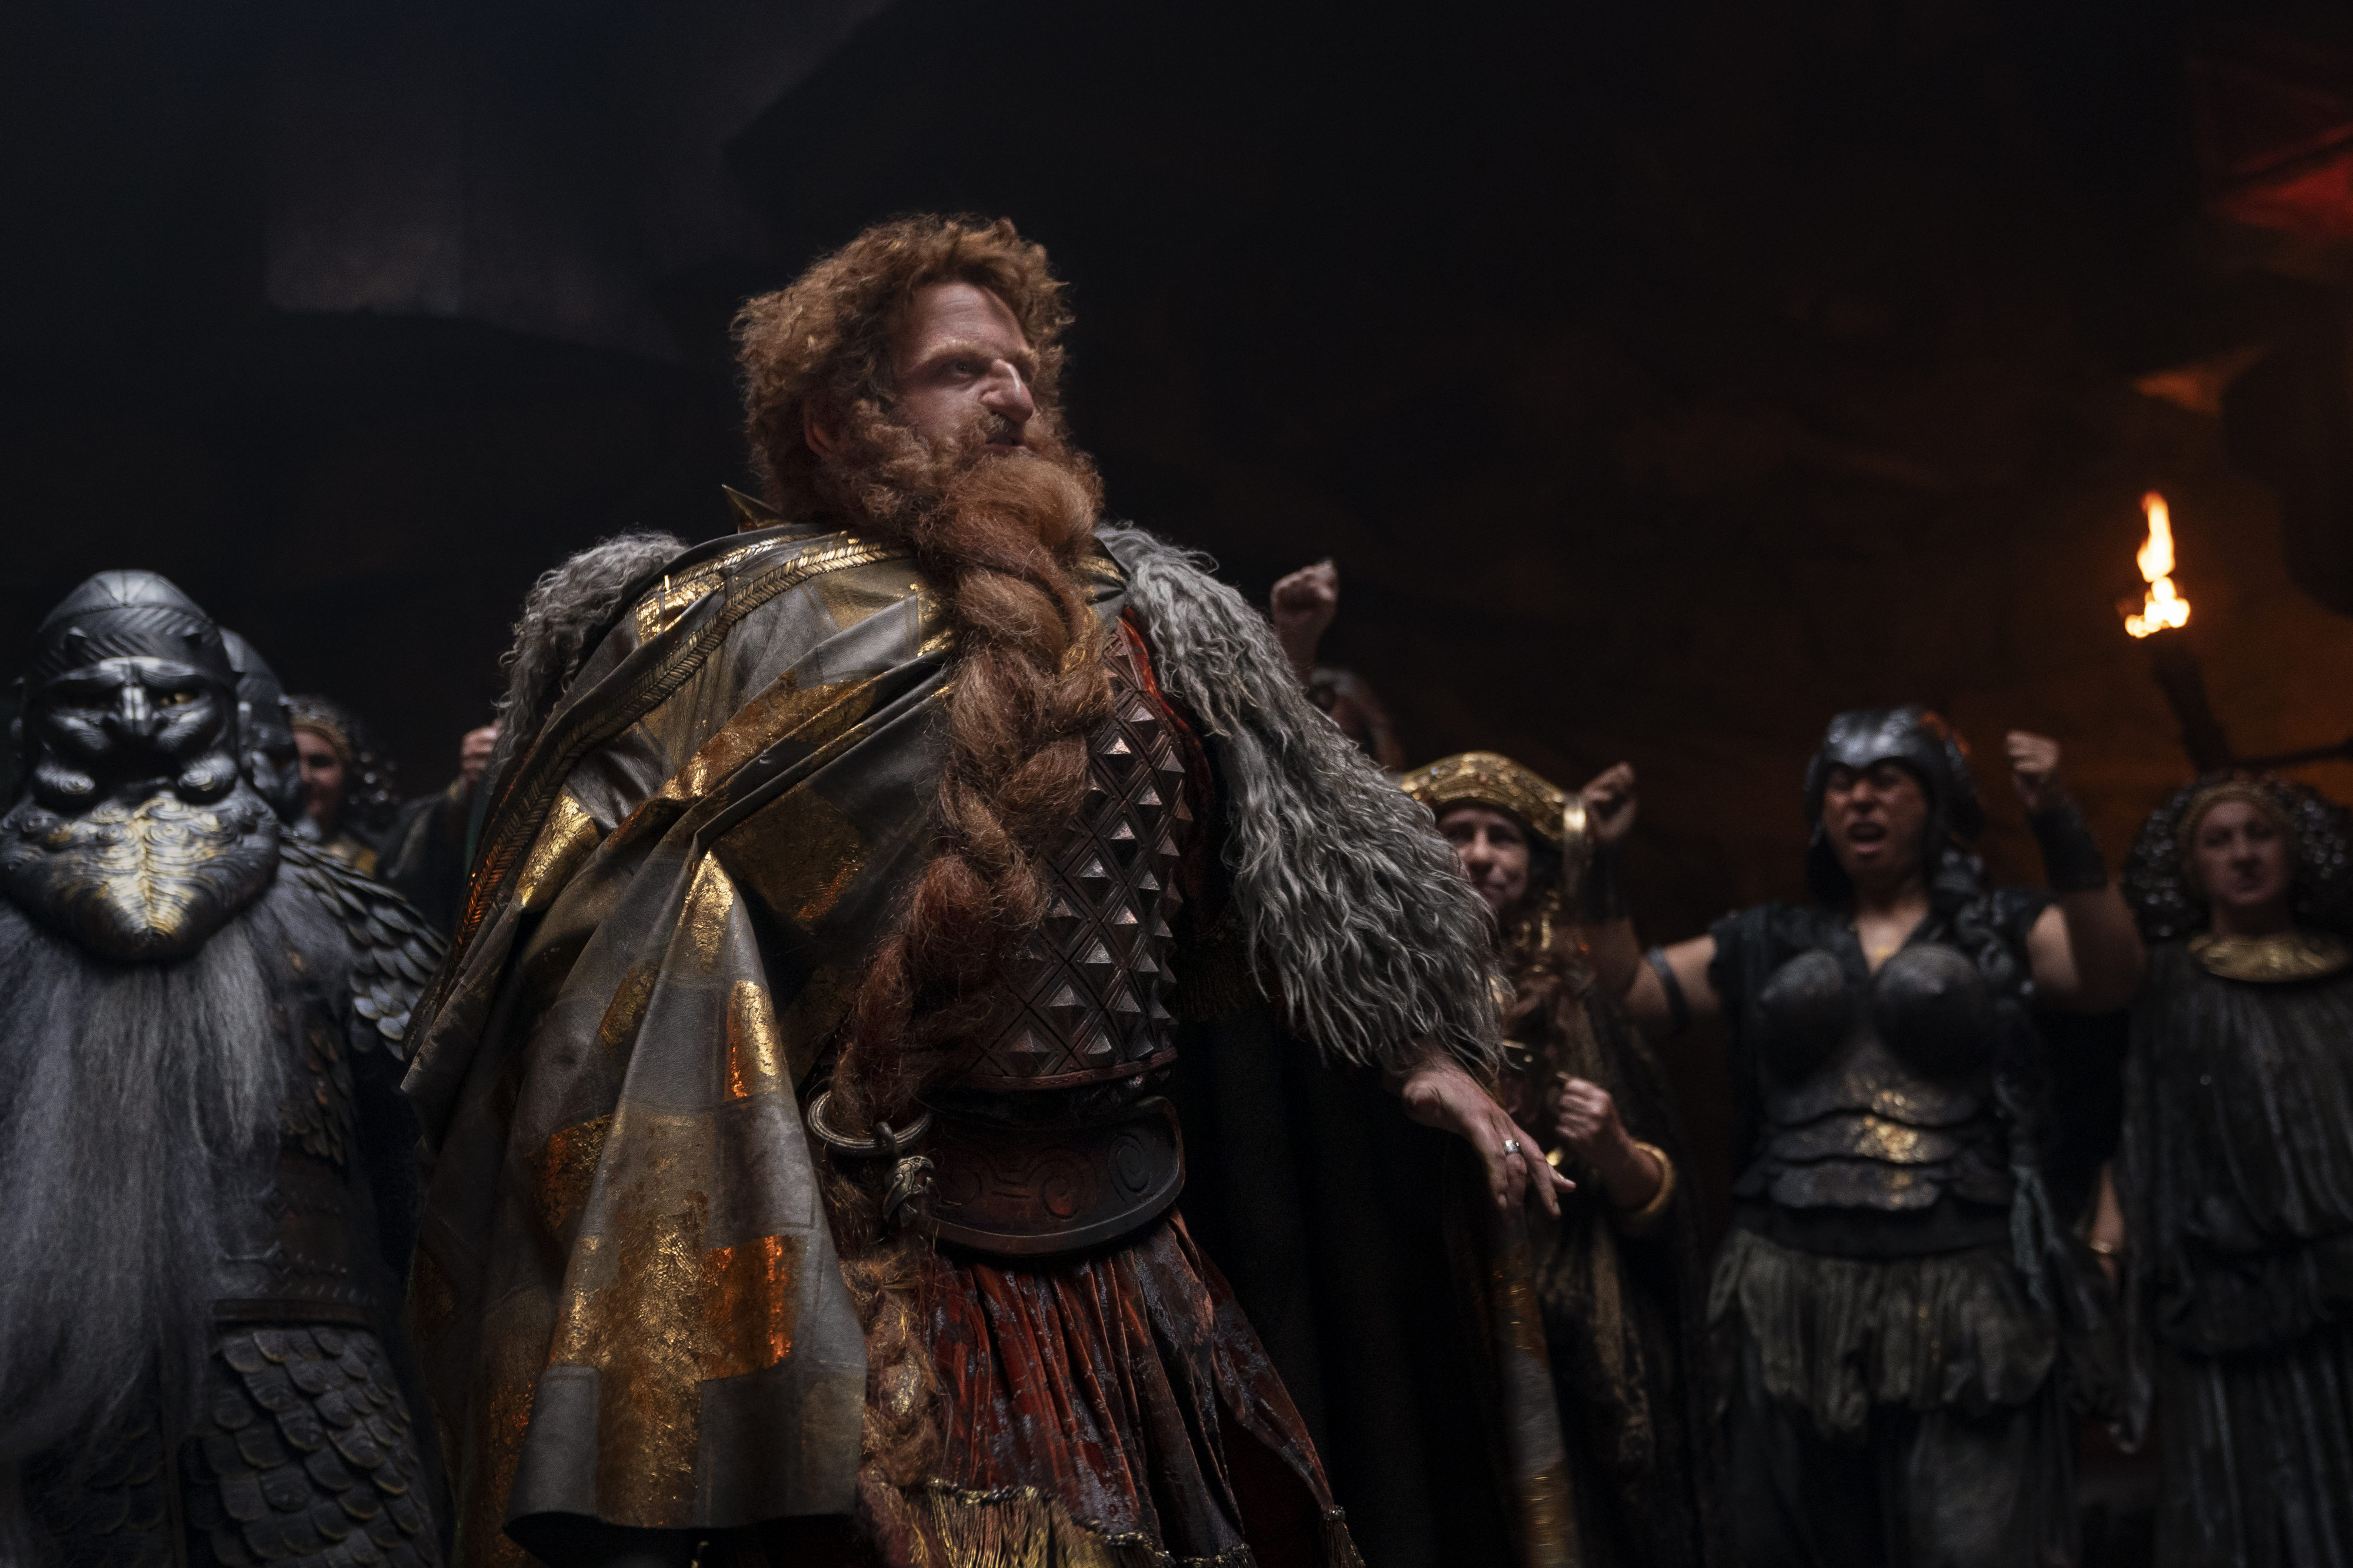 Prince Durin stands proud while Dwarves cheer him on in The Lord of the Rings: The Rings of Power.